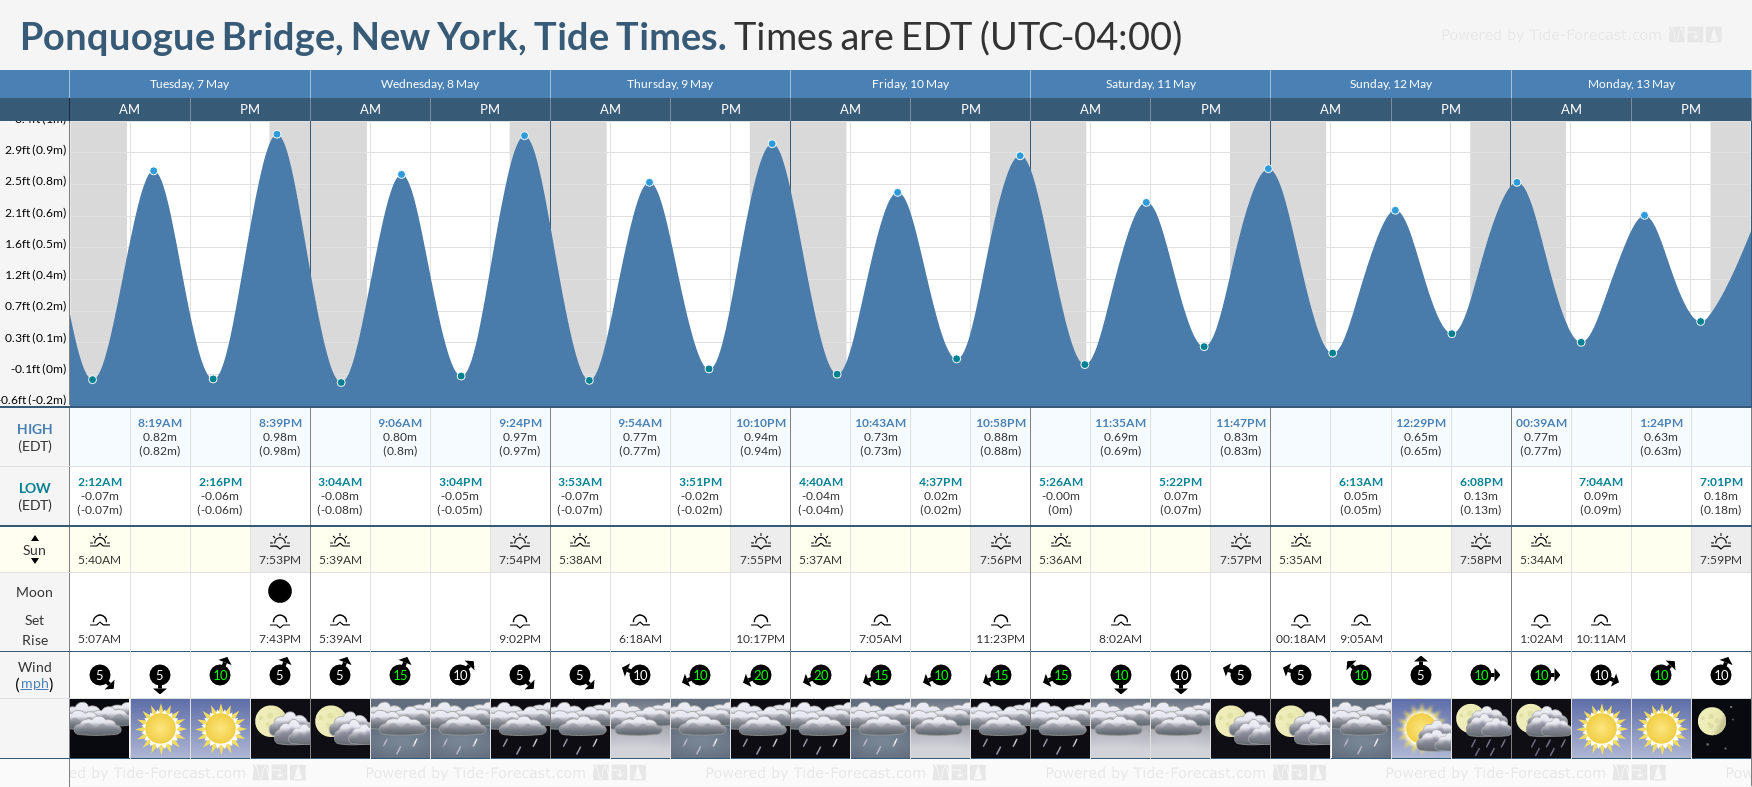 Ponquogue Bridge, New York Tide Chart including high and low tide times for the next 7 days